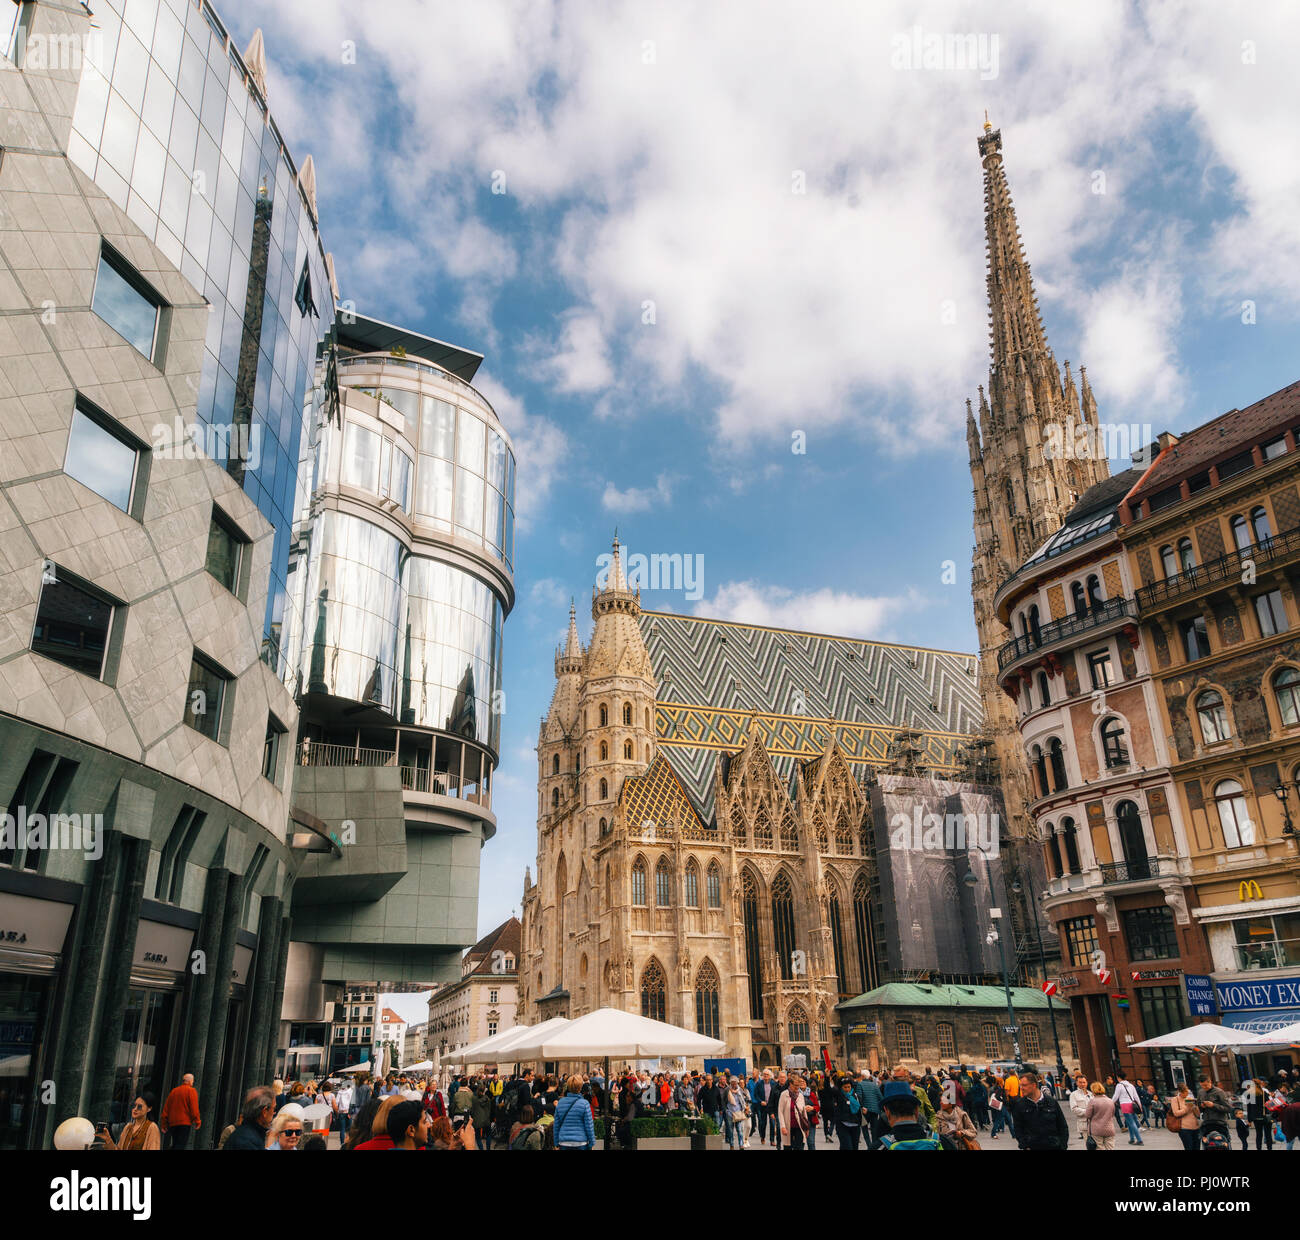 Vienna, Austria, 1 October, 2017: St Stephen's church and surrounding modern buildings Haas Haus with many tourists in Stephansplatz Stock Photo